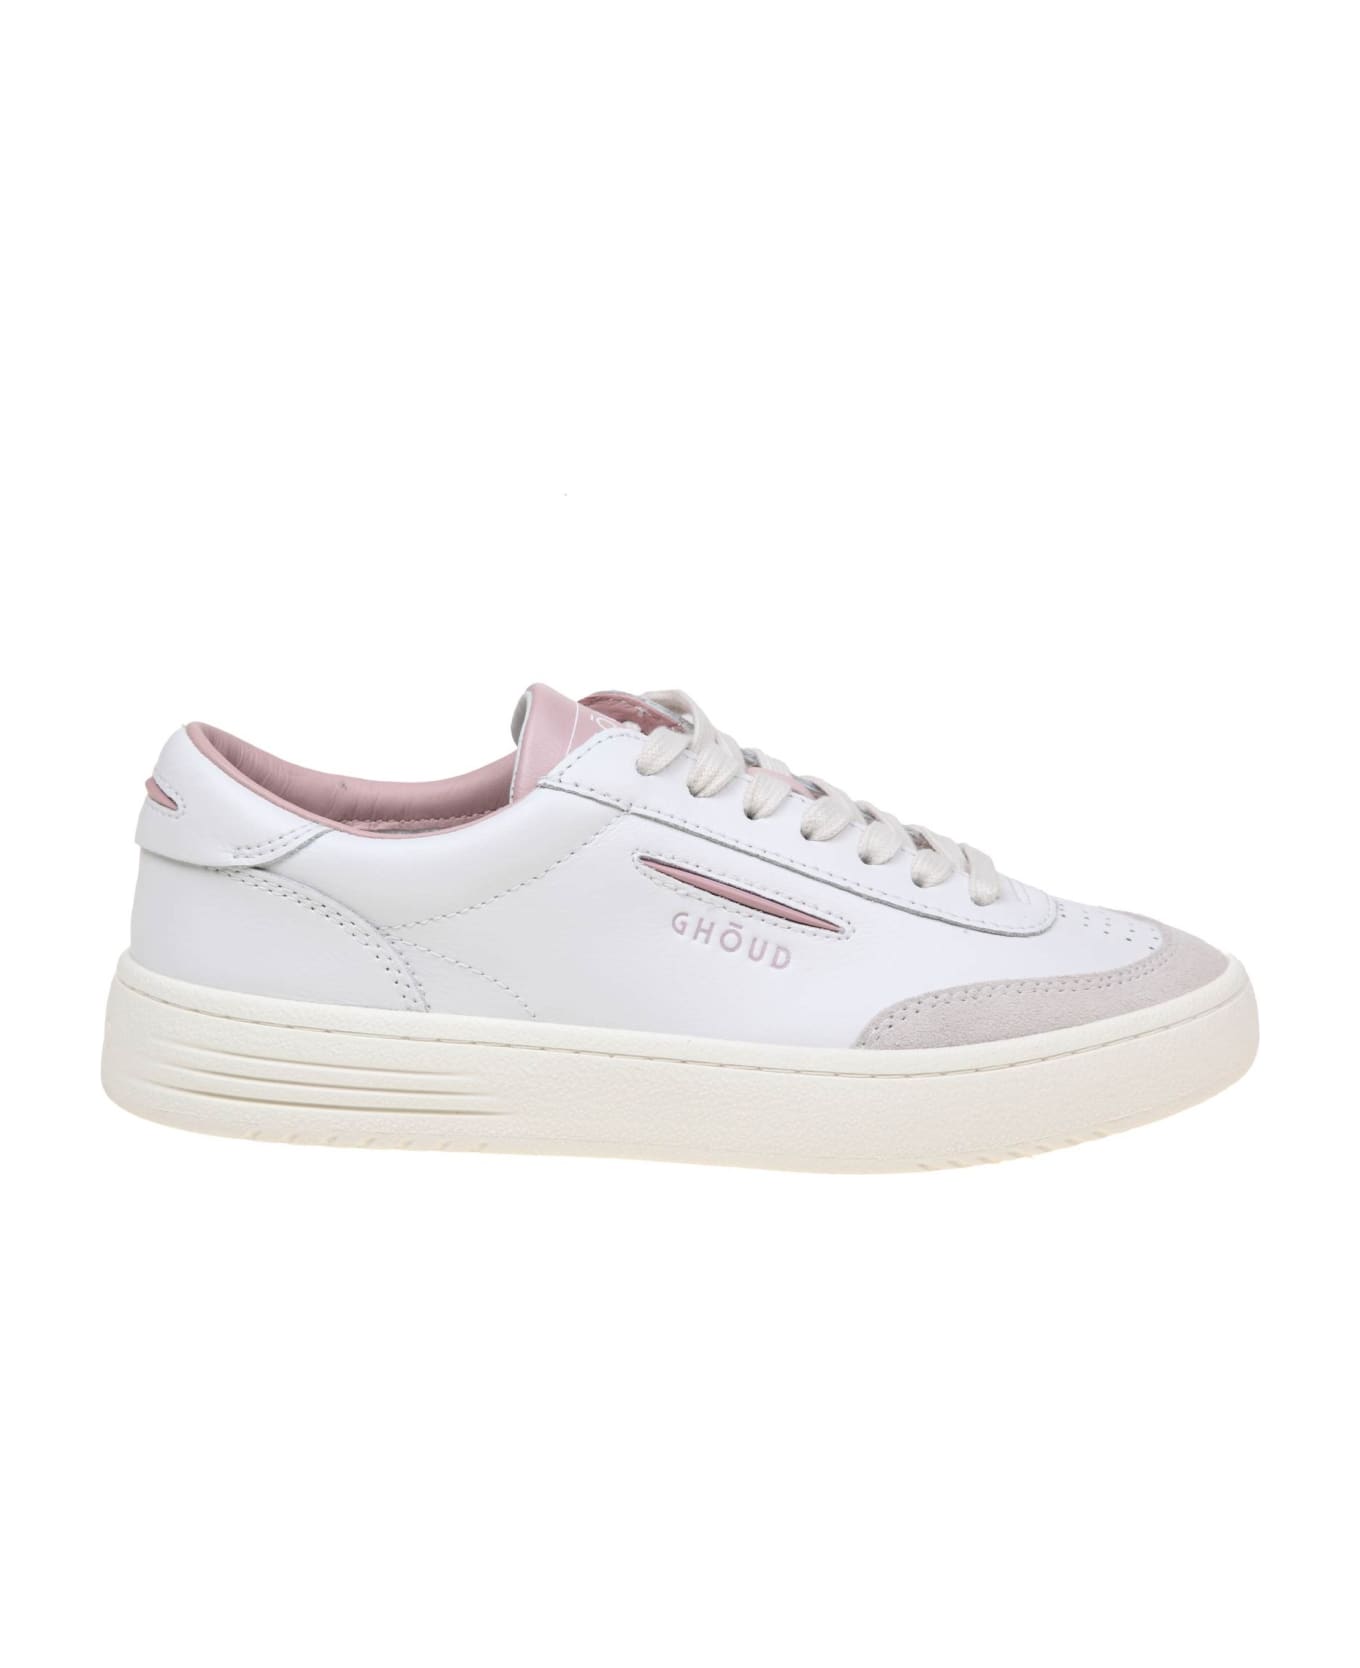 GHOUD Lido Low Sneakers In White/pink Leather And Suede - LEAT/SUEDE WHT/PINK